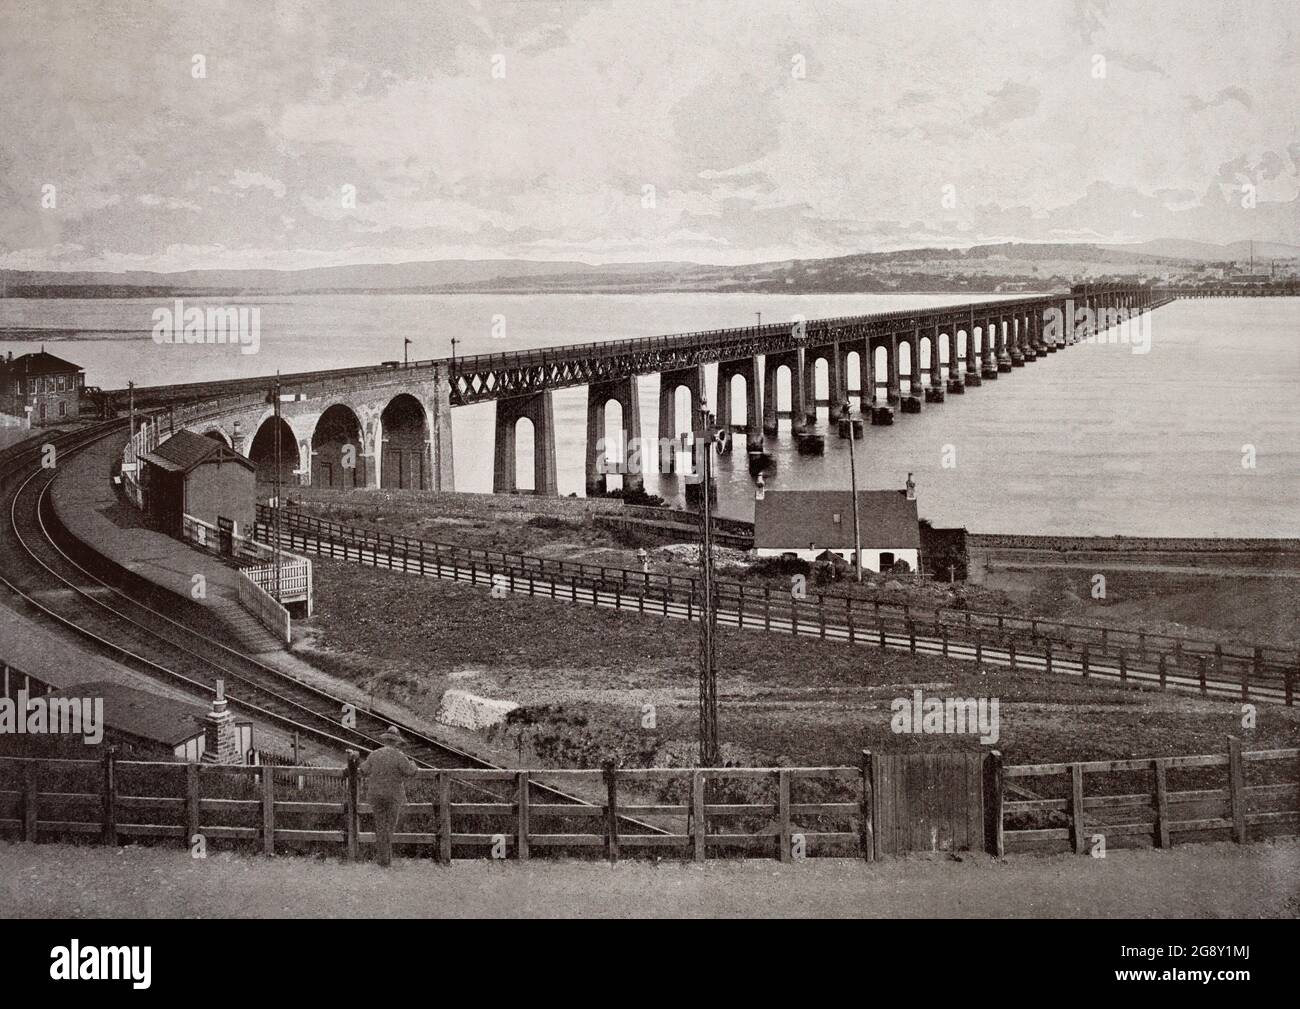 A late 19th century view of the Tay Bridge that carries the railway across the Firth of Tay in Scotland between Dundee and the suburb of Wormit in Fife. Its span is 2.75 miles (4.43 kilometres). Plans for a bridge over the Tay to replace the train ferry service emerged in 1854, but the first Tay Bridge did not open until 1878. The bridge suddenly collapsed in high winds the following year. It was replaced by the second bridge (pictured) constructed of iron and steel with a double-track parallel to the remains of the first bridge. Work commenced in 1883 and the bridge was opened in 1887. Stock Photo